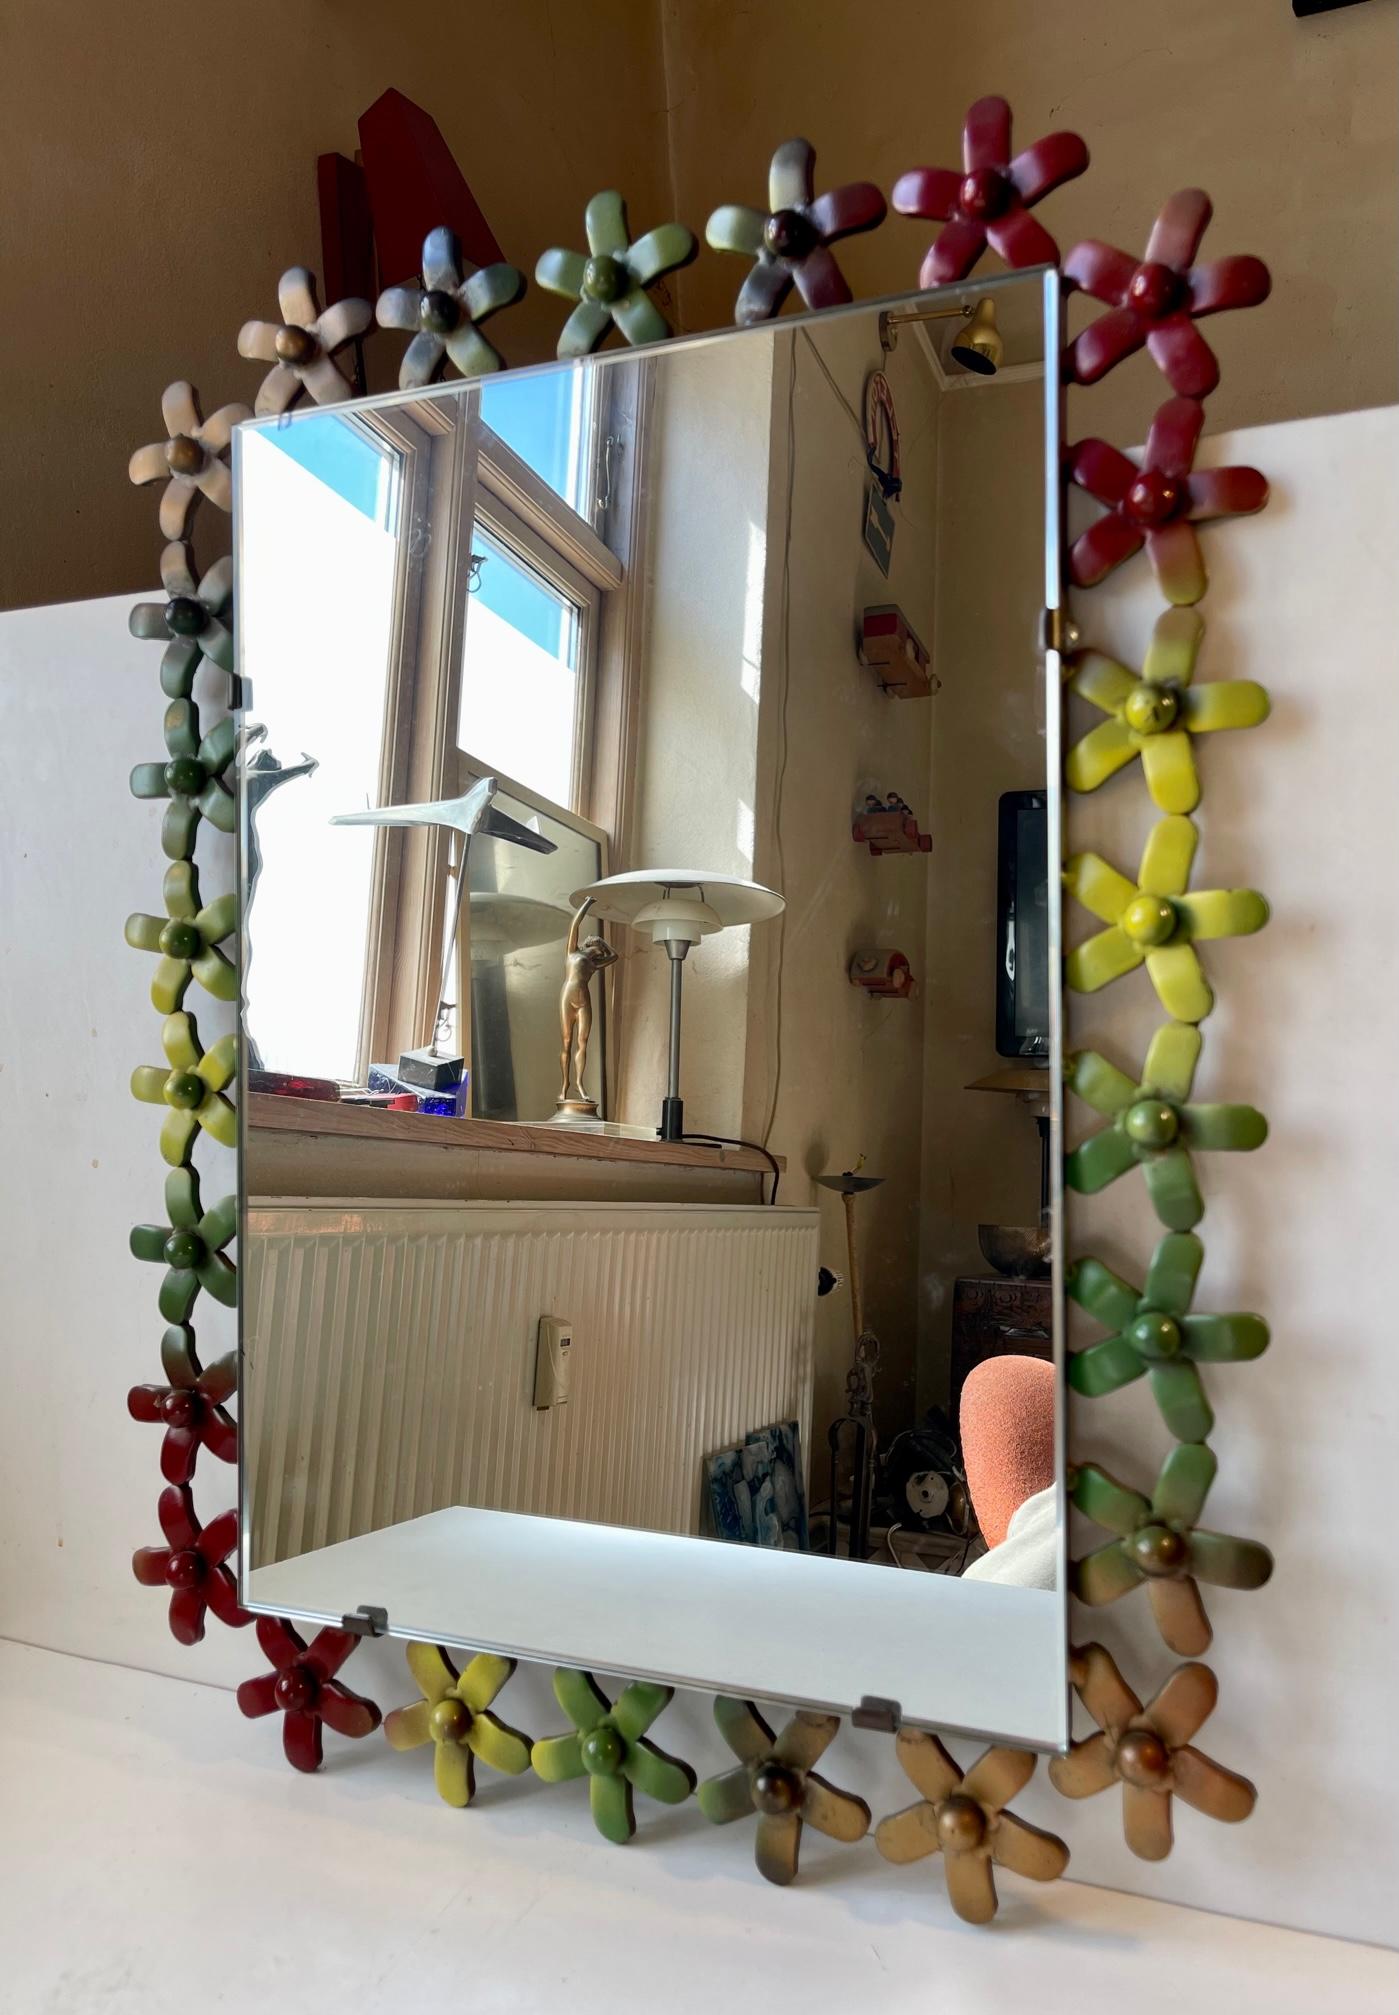 A very heavy sculptural wall mirror in welded iron. The frame is set with multi-colored flowers. Bought at a Flea marked in Verona Italy and made during the 1970s locally. Measurements: H: 63/49 cm, W: 47/35 cm, Dept: 3 cm.